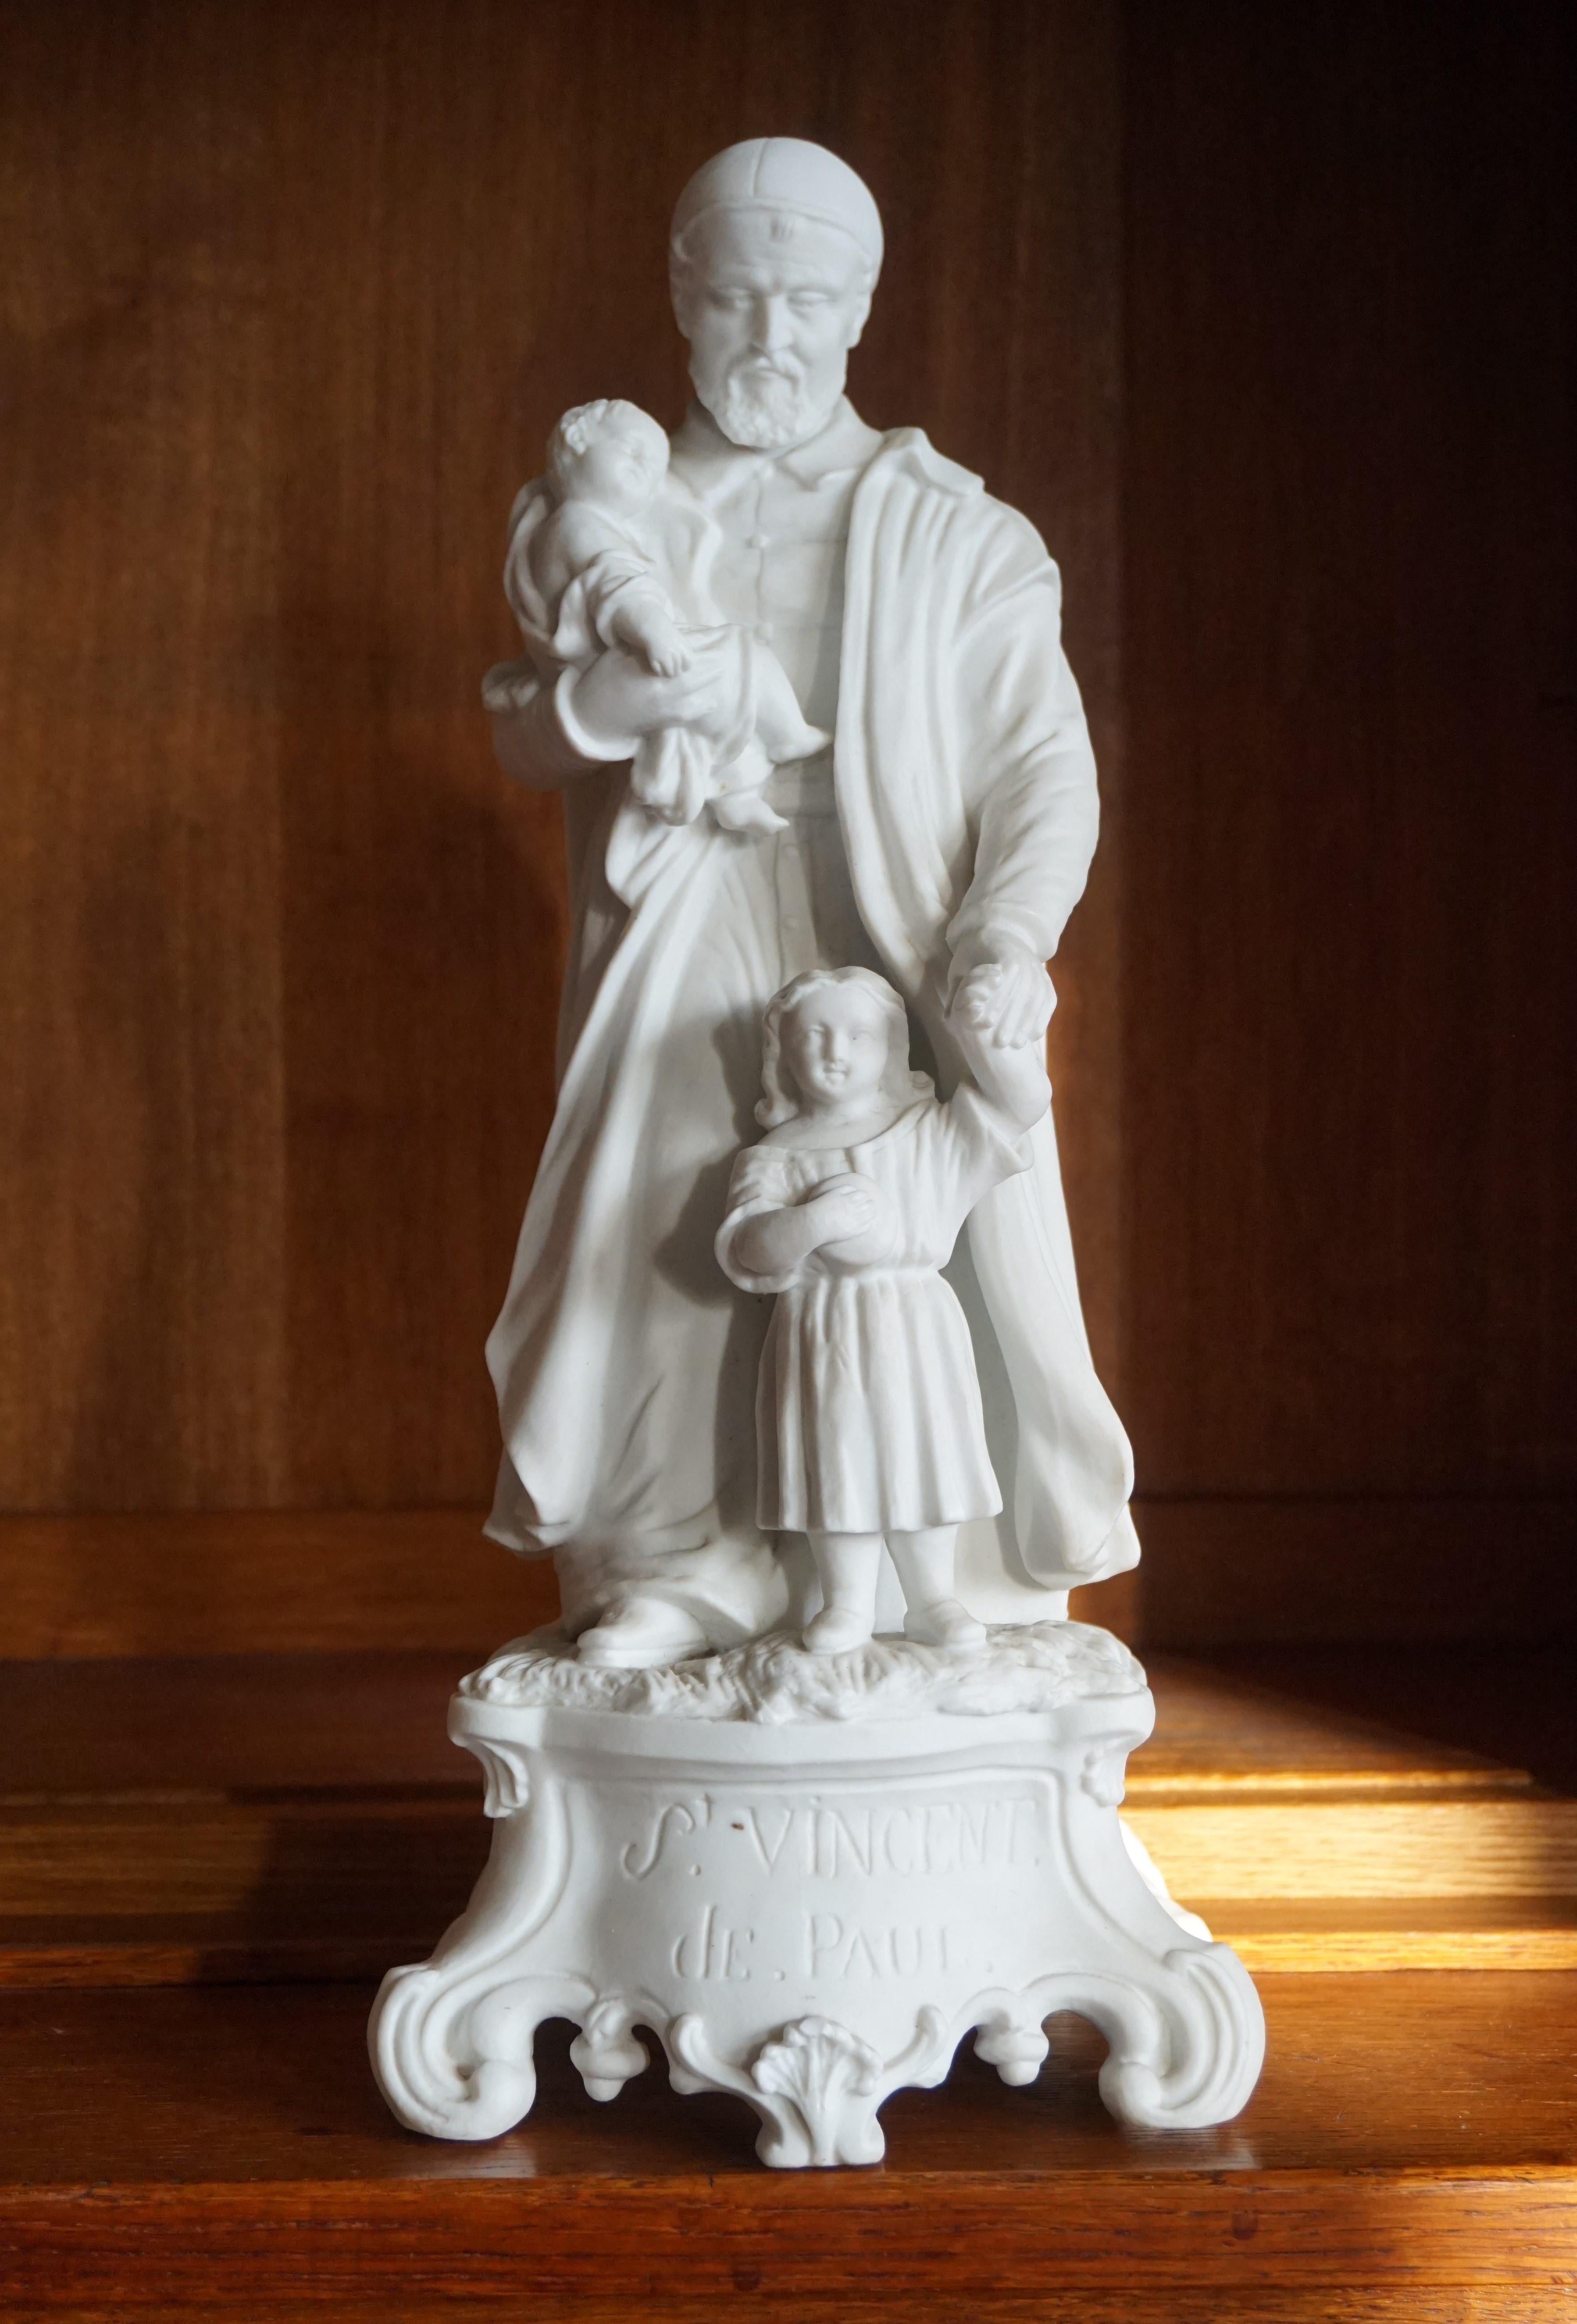 Rare 19th century bisq sculpture of Saint Vincent.

Sculptures of Saint Vincent de Paul are very hard to find anywhere in the world and for us to have found this excellent quality work of religious art in near perfect condition, again felt like a